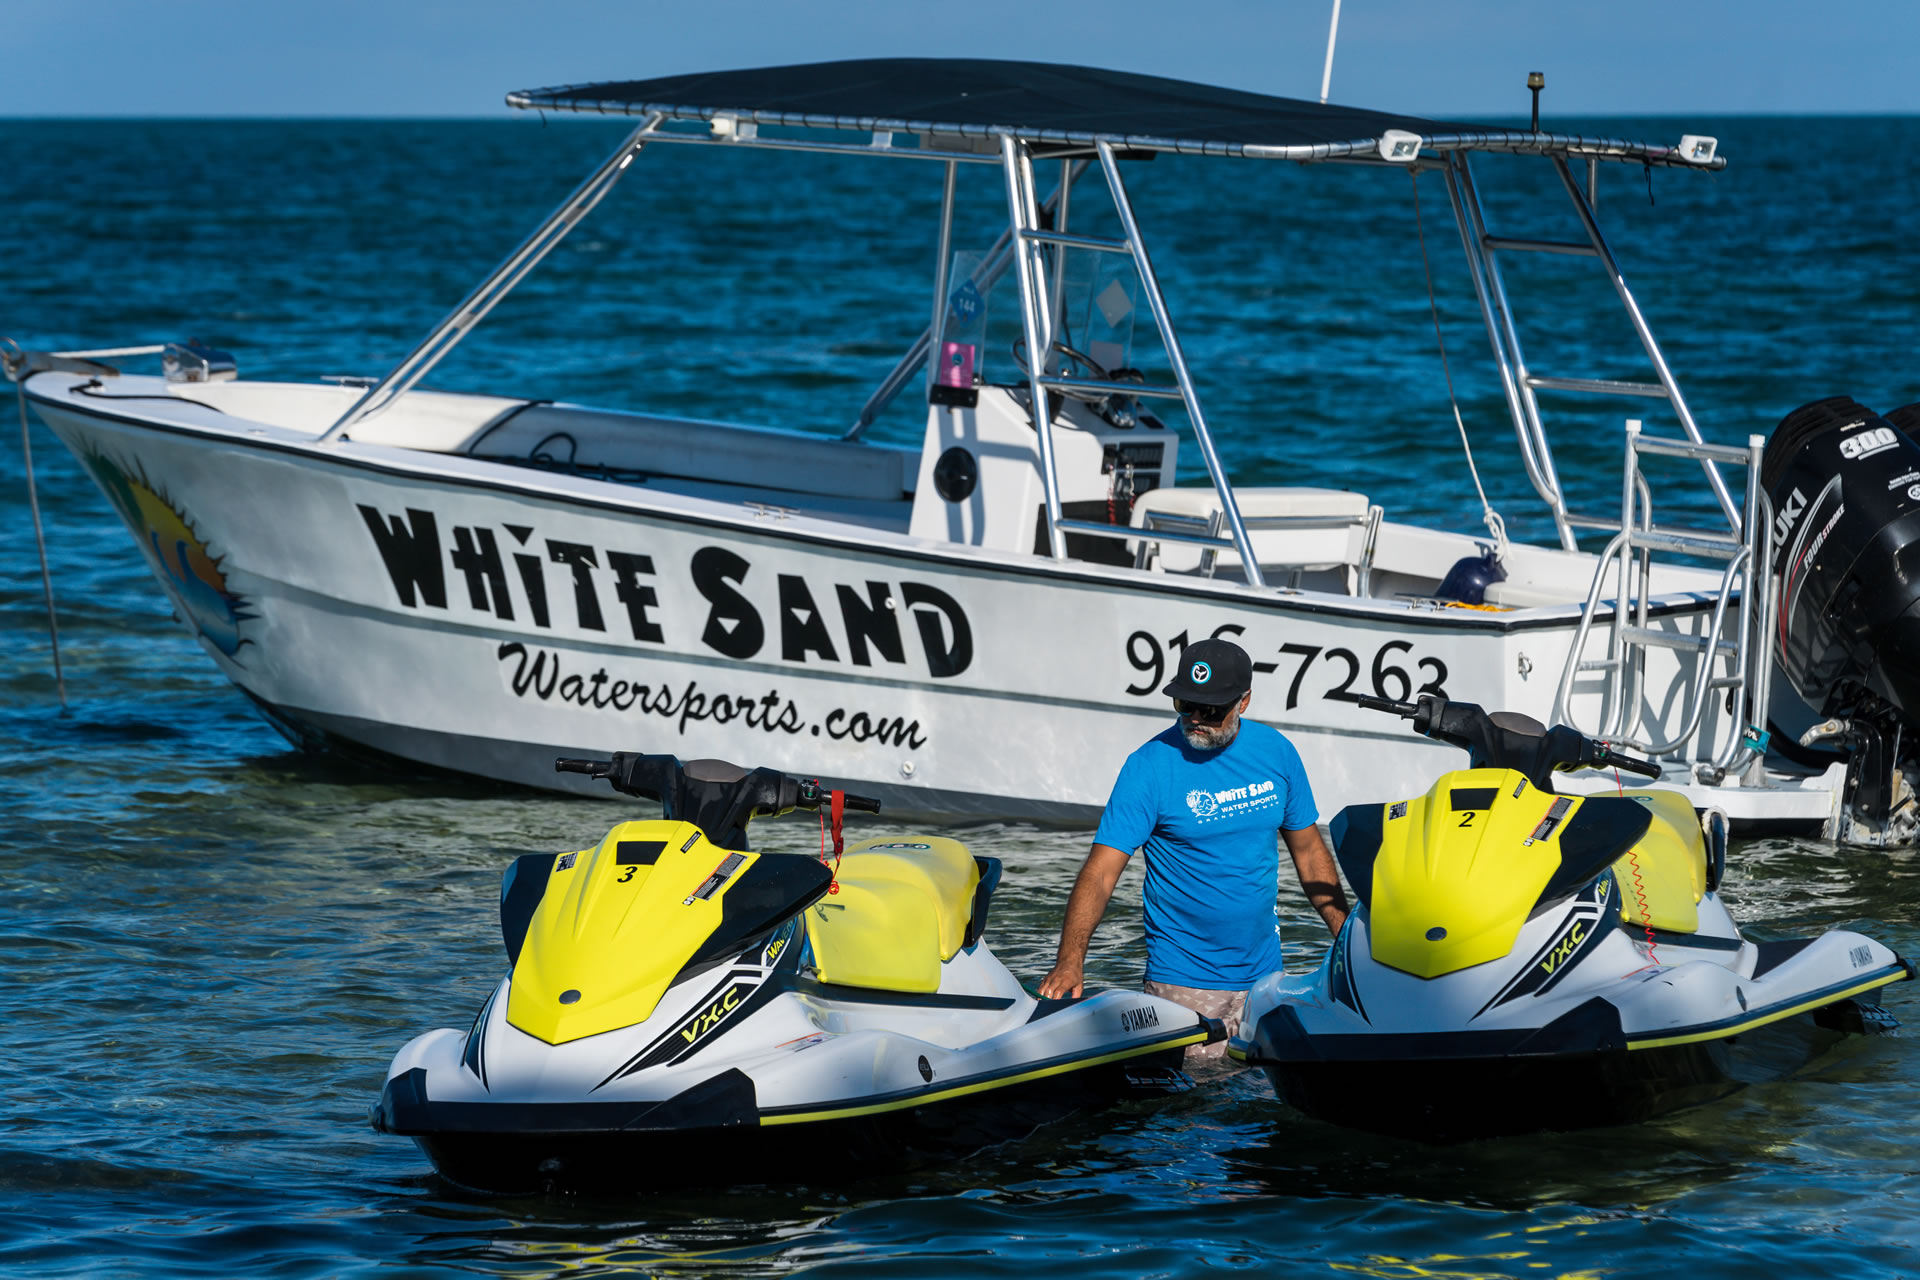 A man standing in the water next to two personal watercraft and a boat with the White Sand logo and watersports.com on the side.